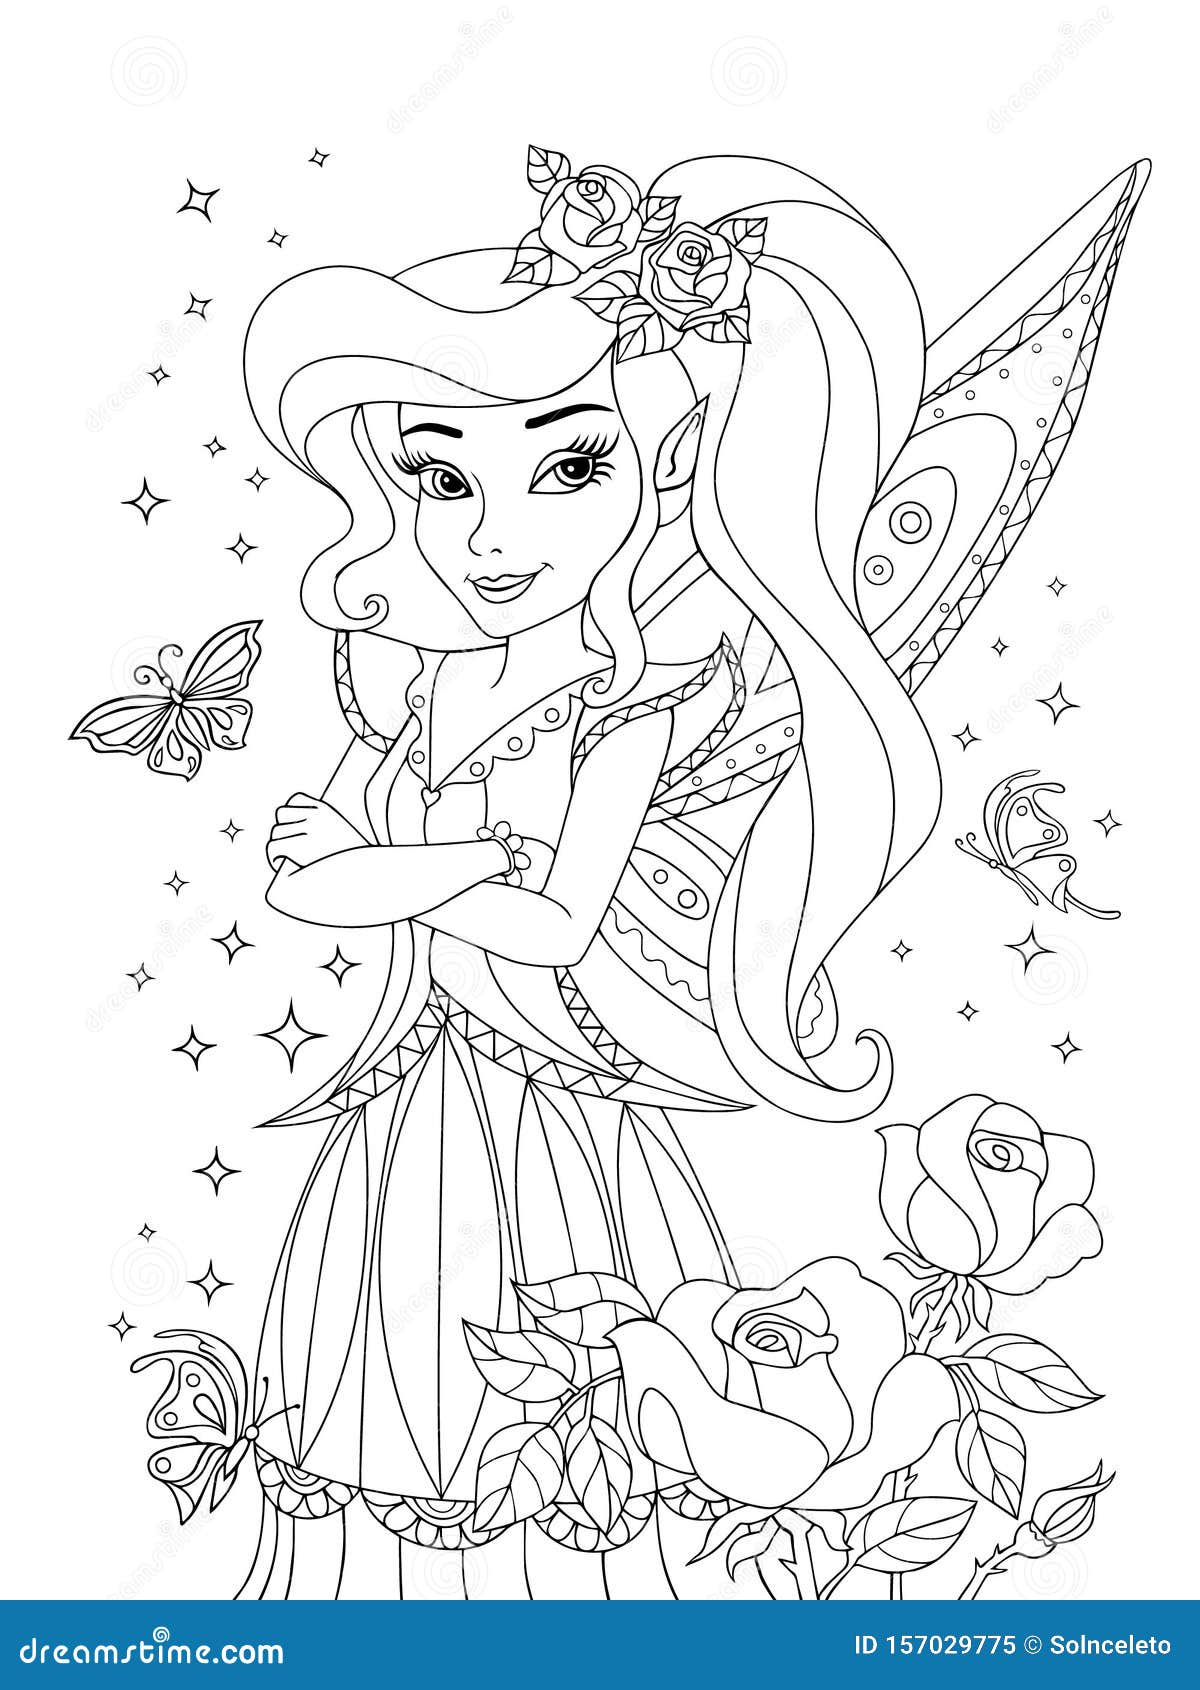   of cute girl. fashionable princes fairy with wings.